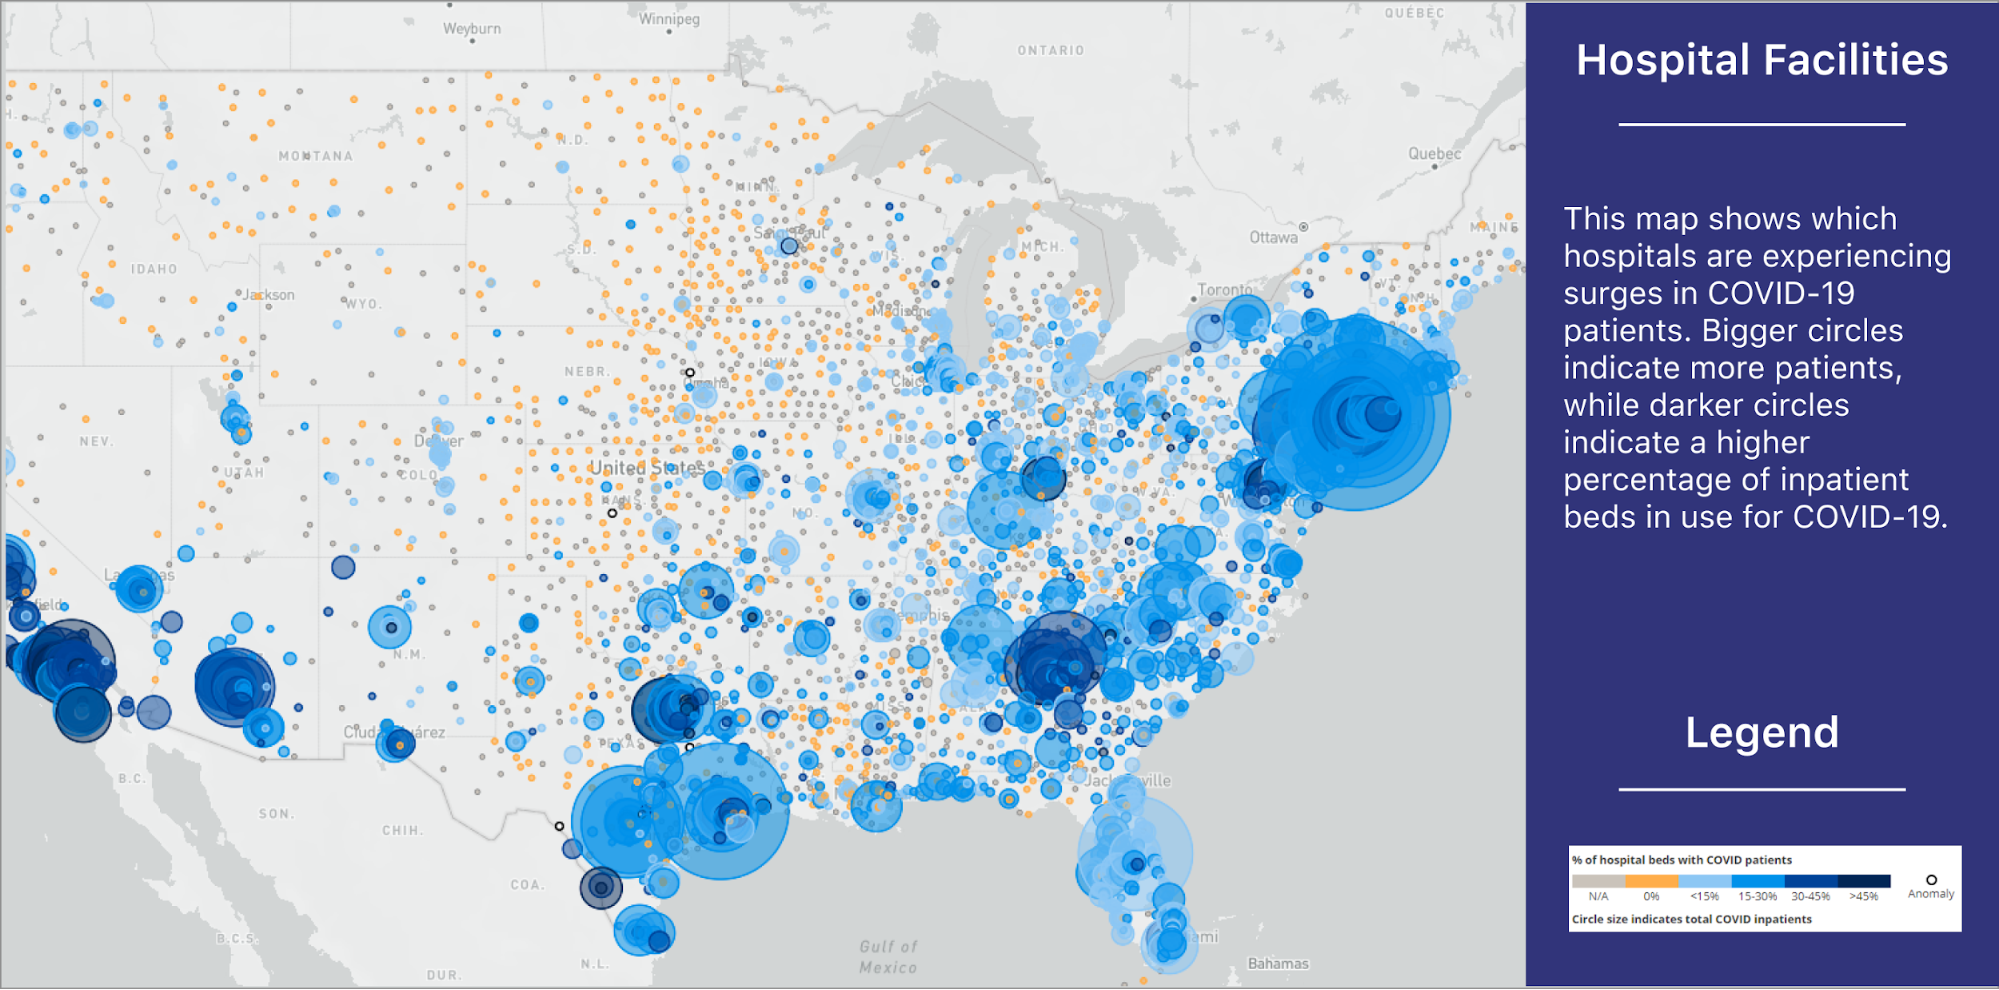 Map showing hospitals across the US as bubbles. Each bubble size corresponds to the number of COVID-19 patients in that hospital this week. The biggest bubbles are in and around New York City.